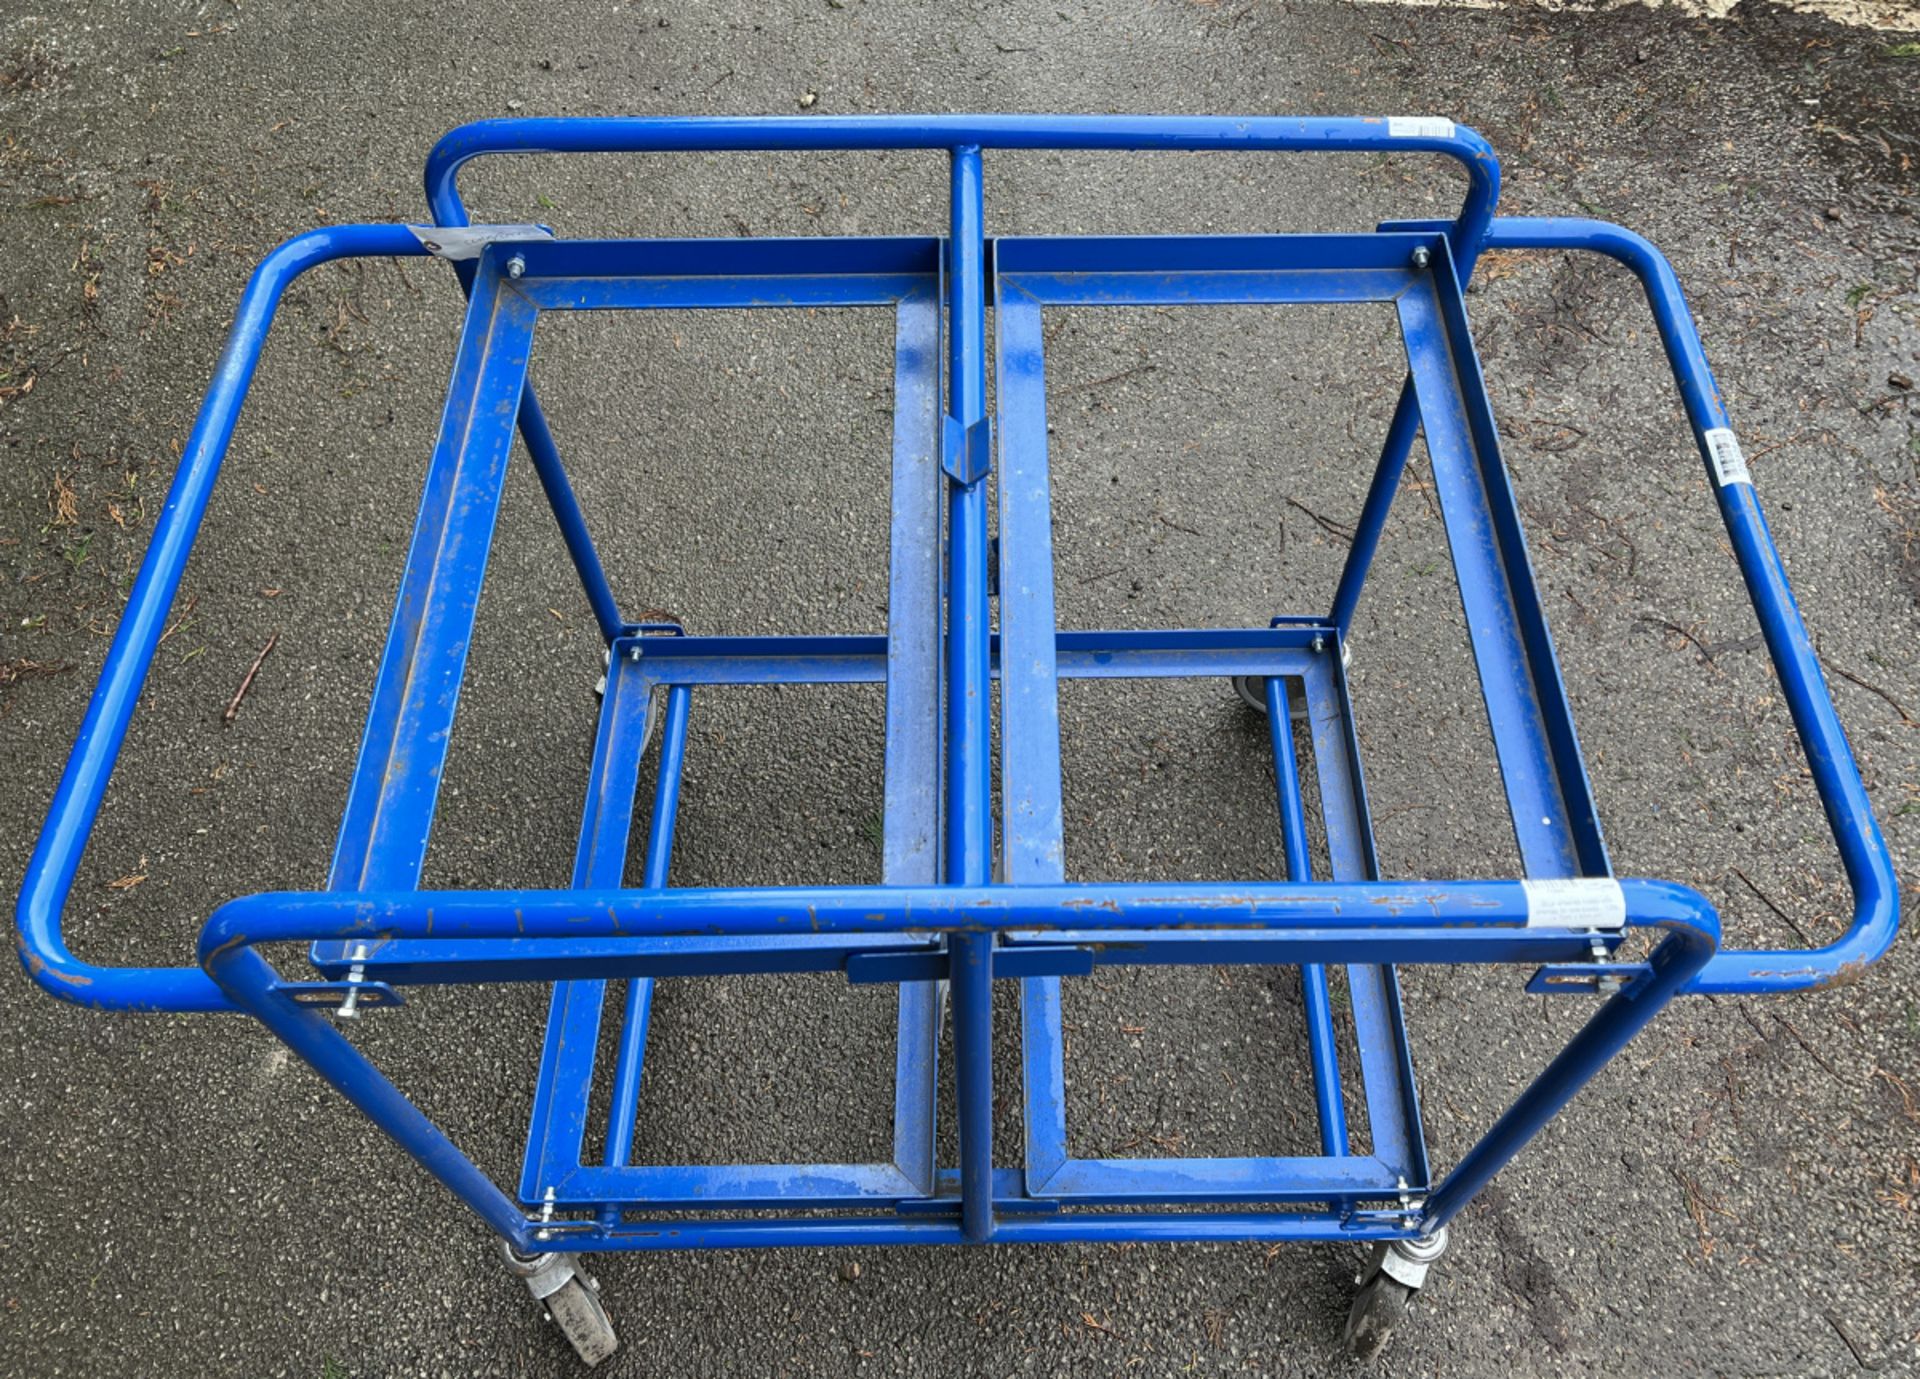 Blue wheeled trolley with shelves for tote boxes - L 120 x W 70 x H 90 cm - Image 2 of 3